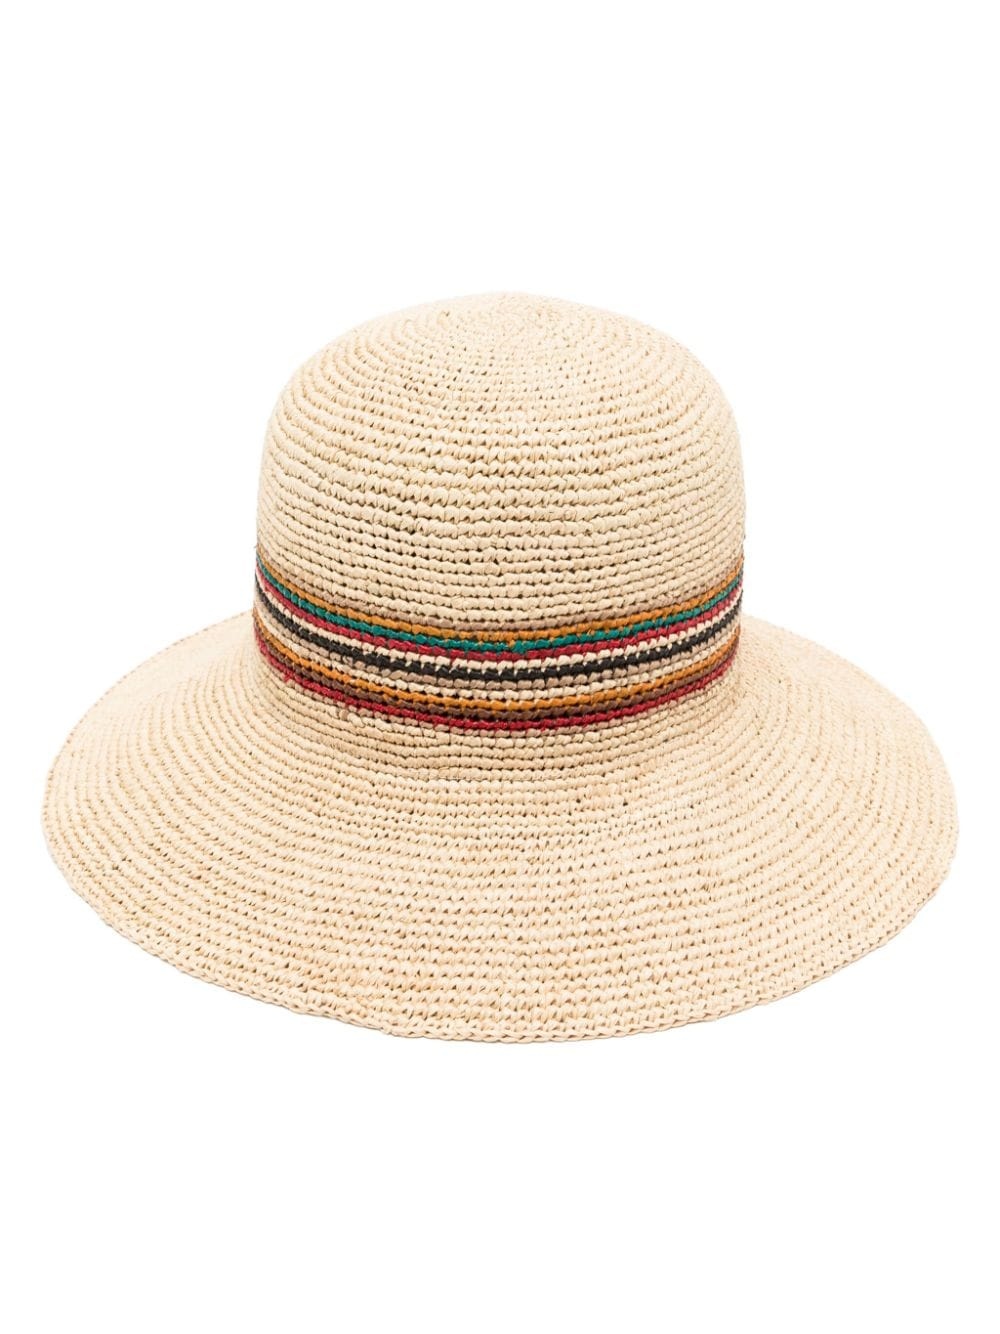 embroidered sun hat - 1